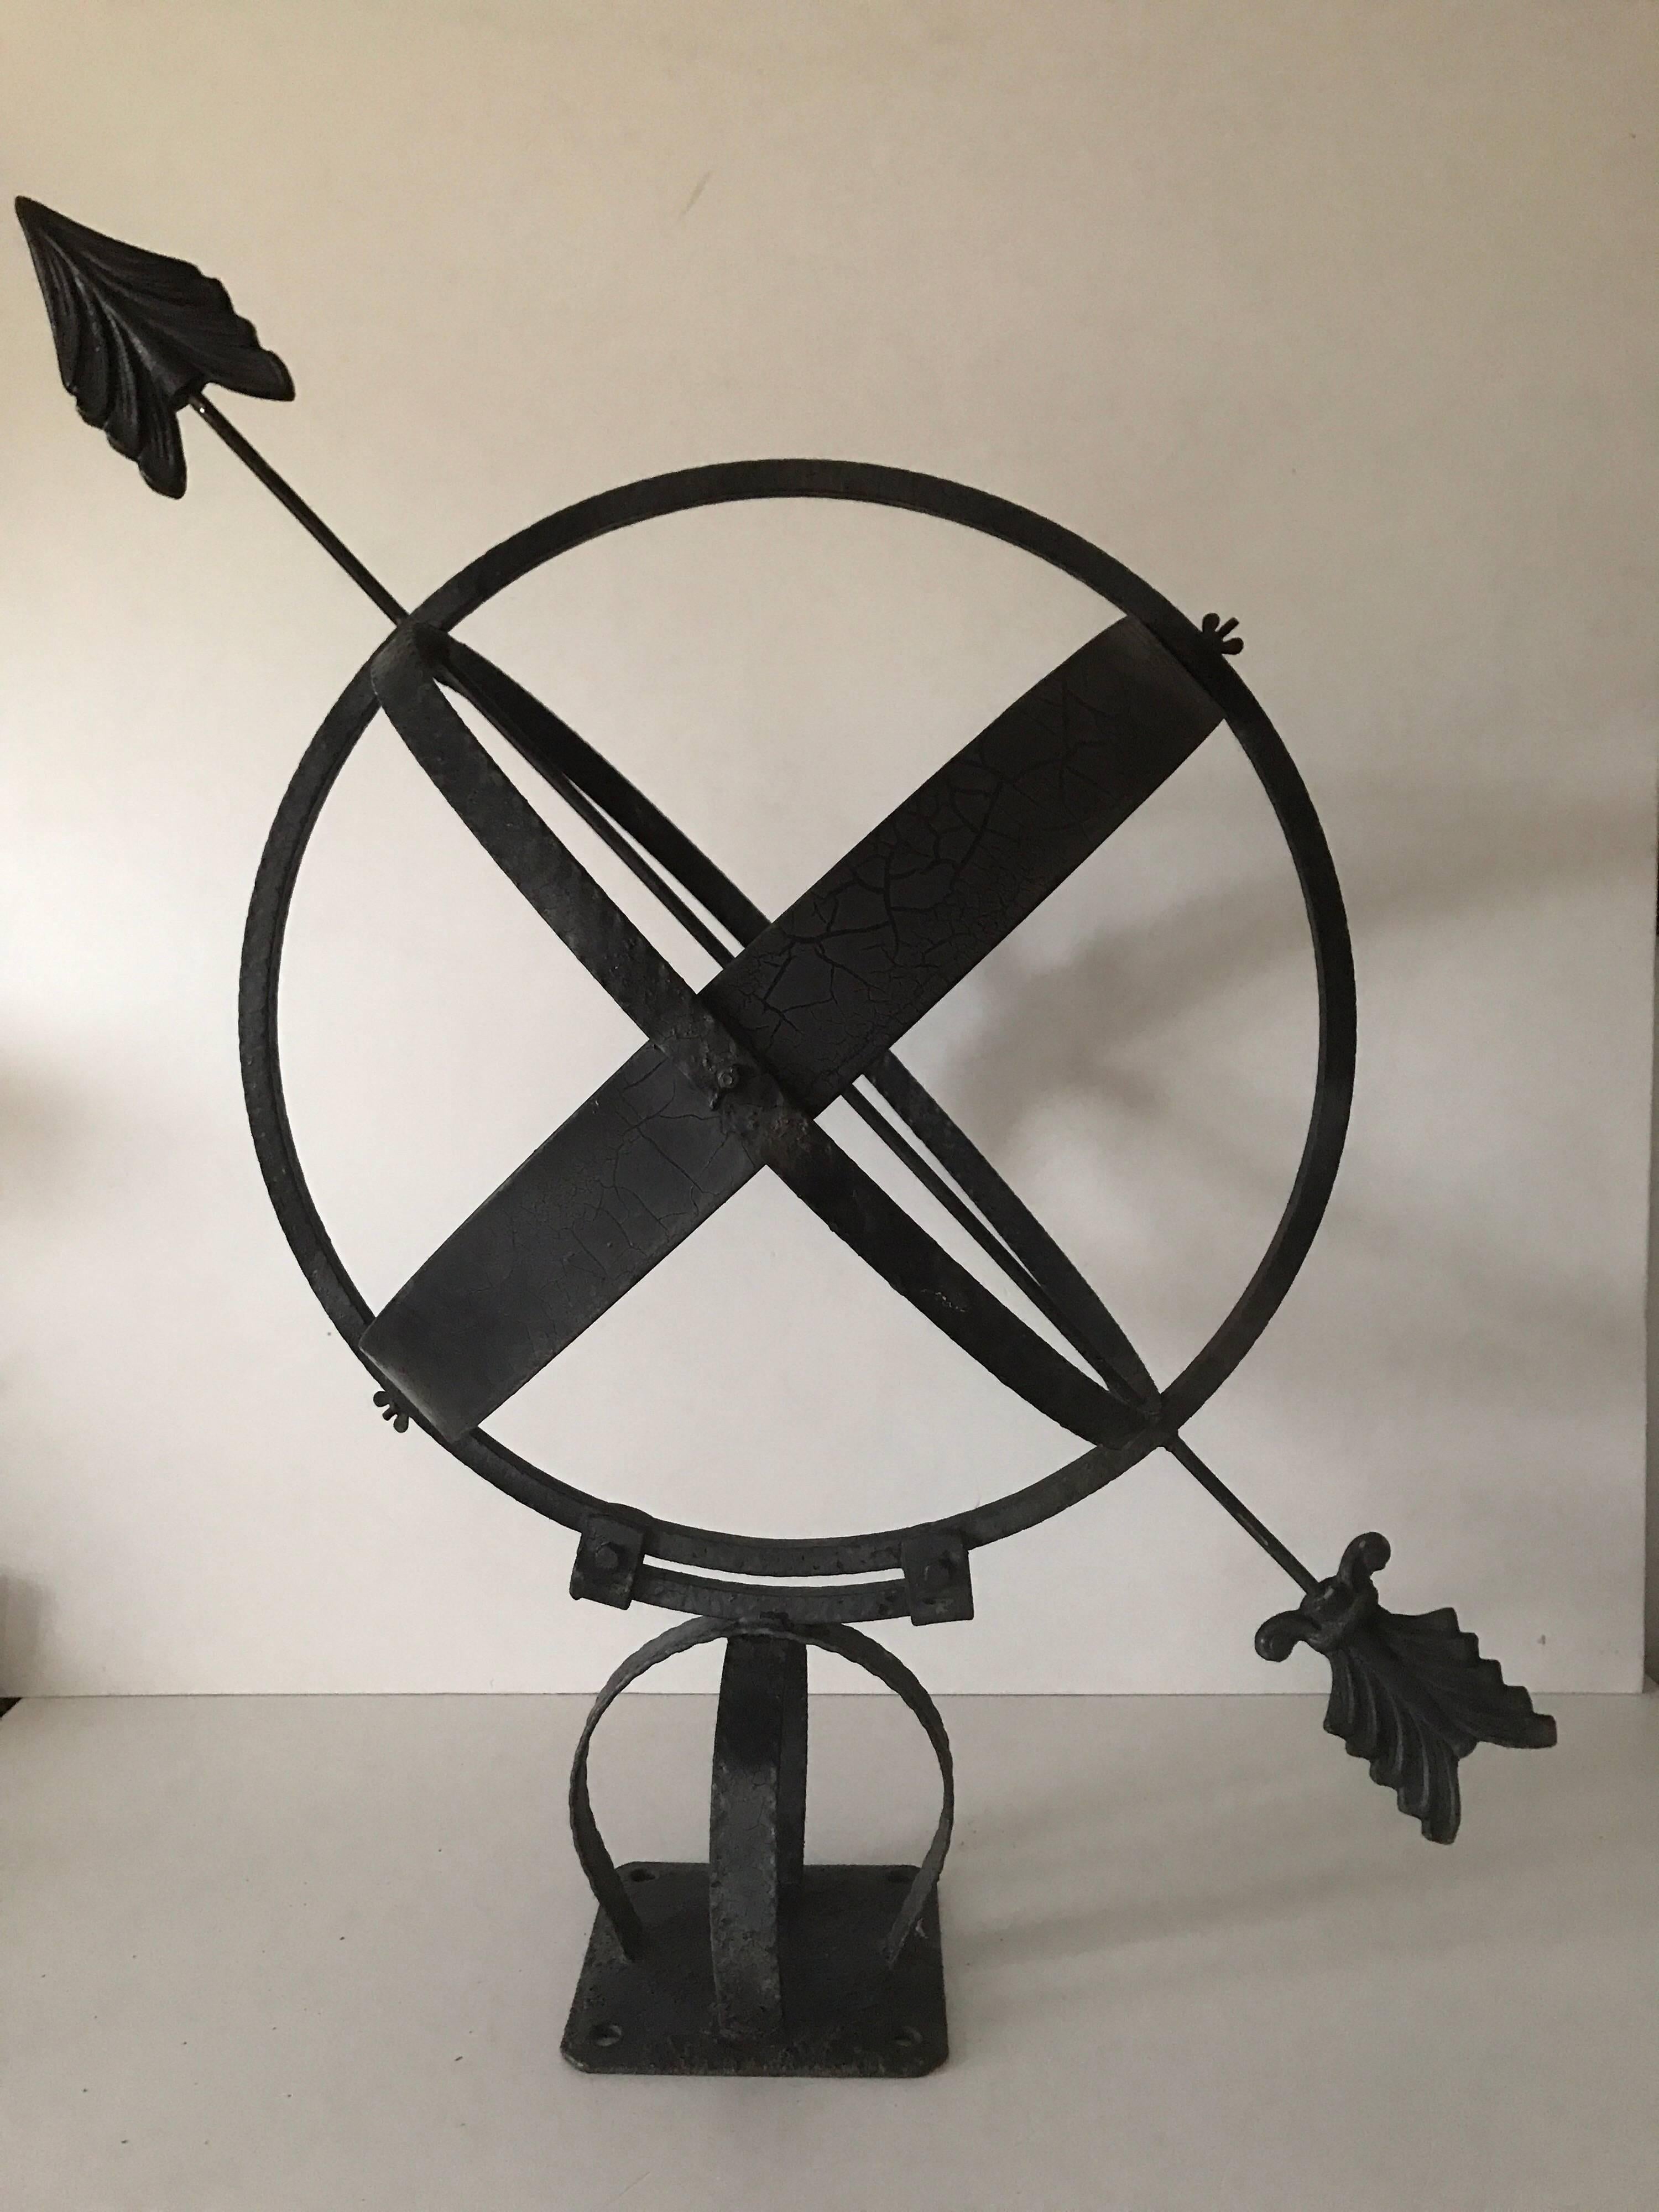 Swedish Mid-20th century wrought iron and copper garden sundial.
Another beautiful sundial that we have for sale, this one is painted black and have copper dials with an arrow across the sphere. The arrowhead and tail is made of cast aluminum. The